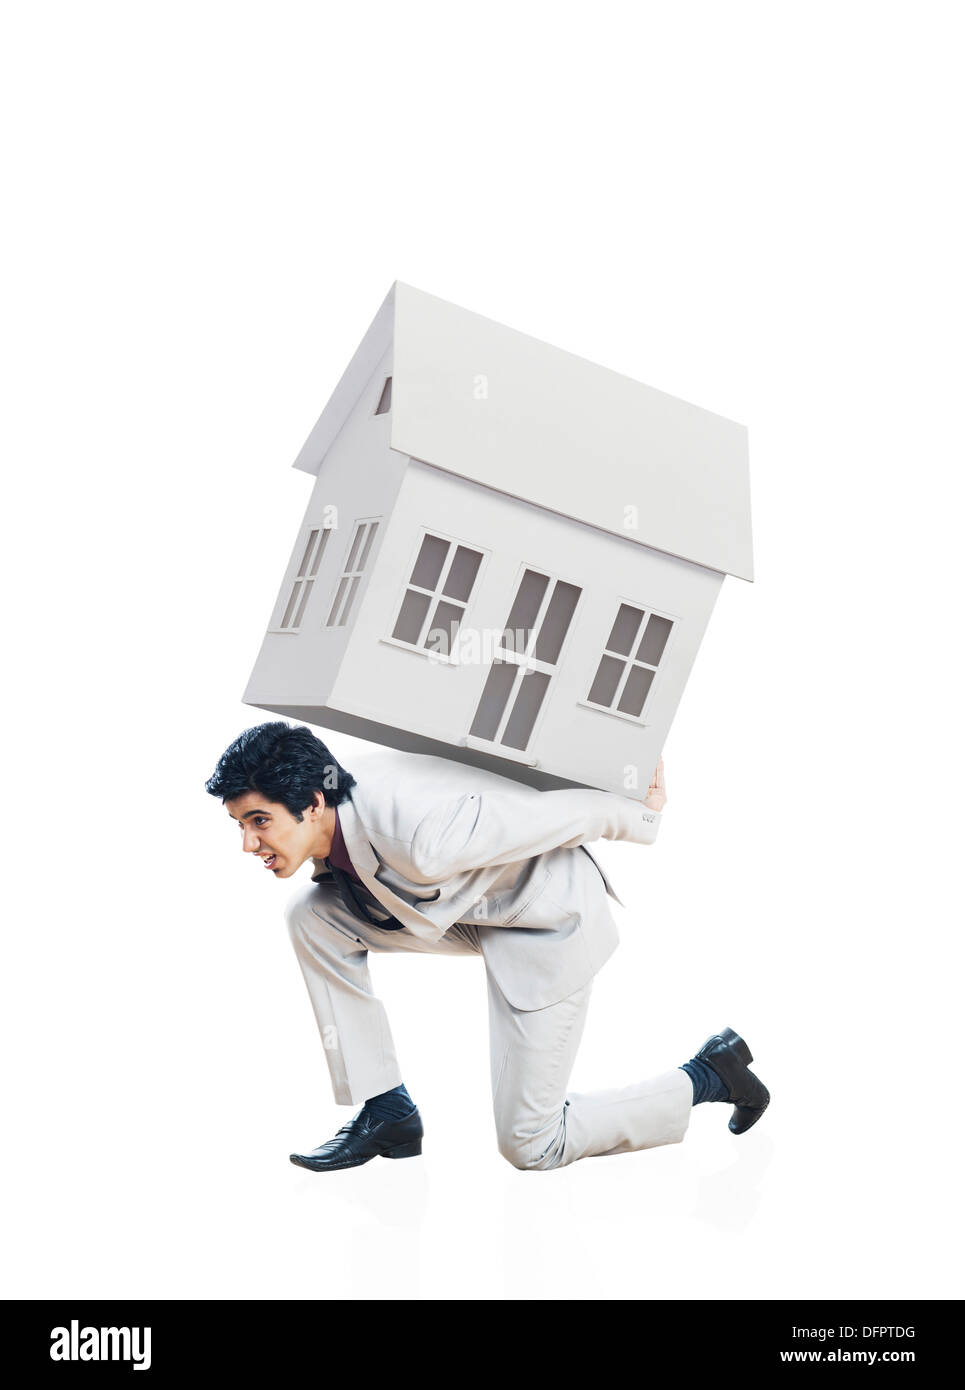 Businessman carrying a model home on his back Stock Photo